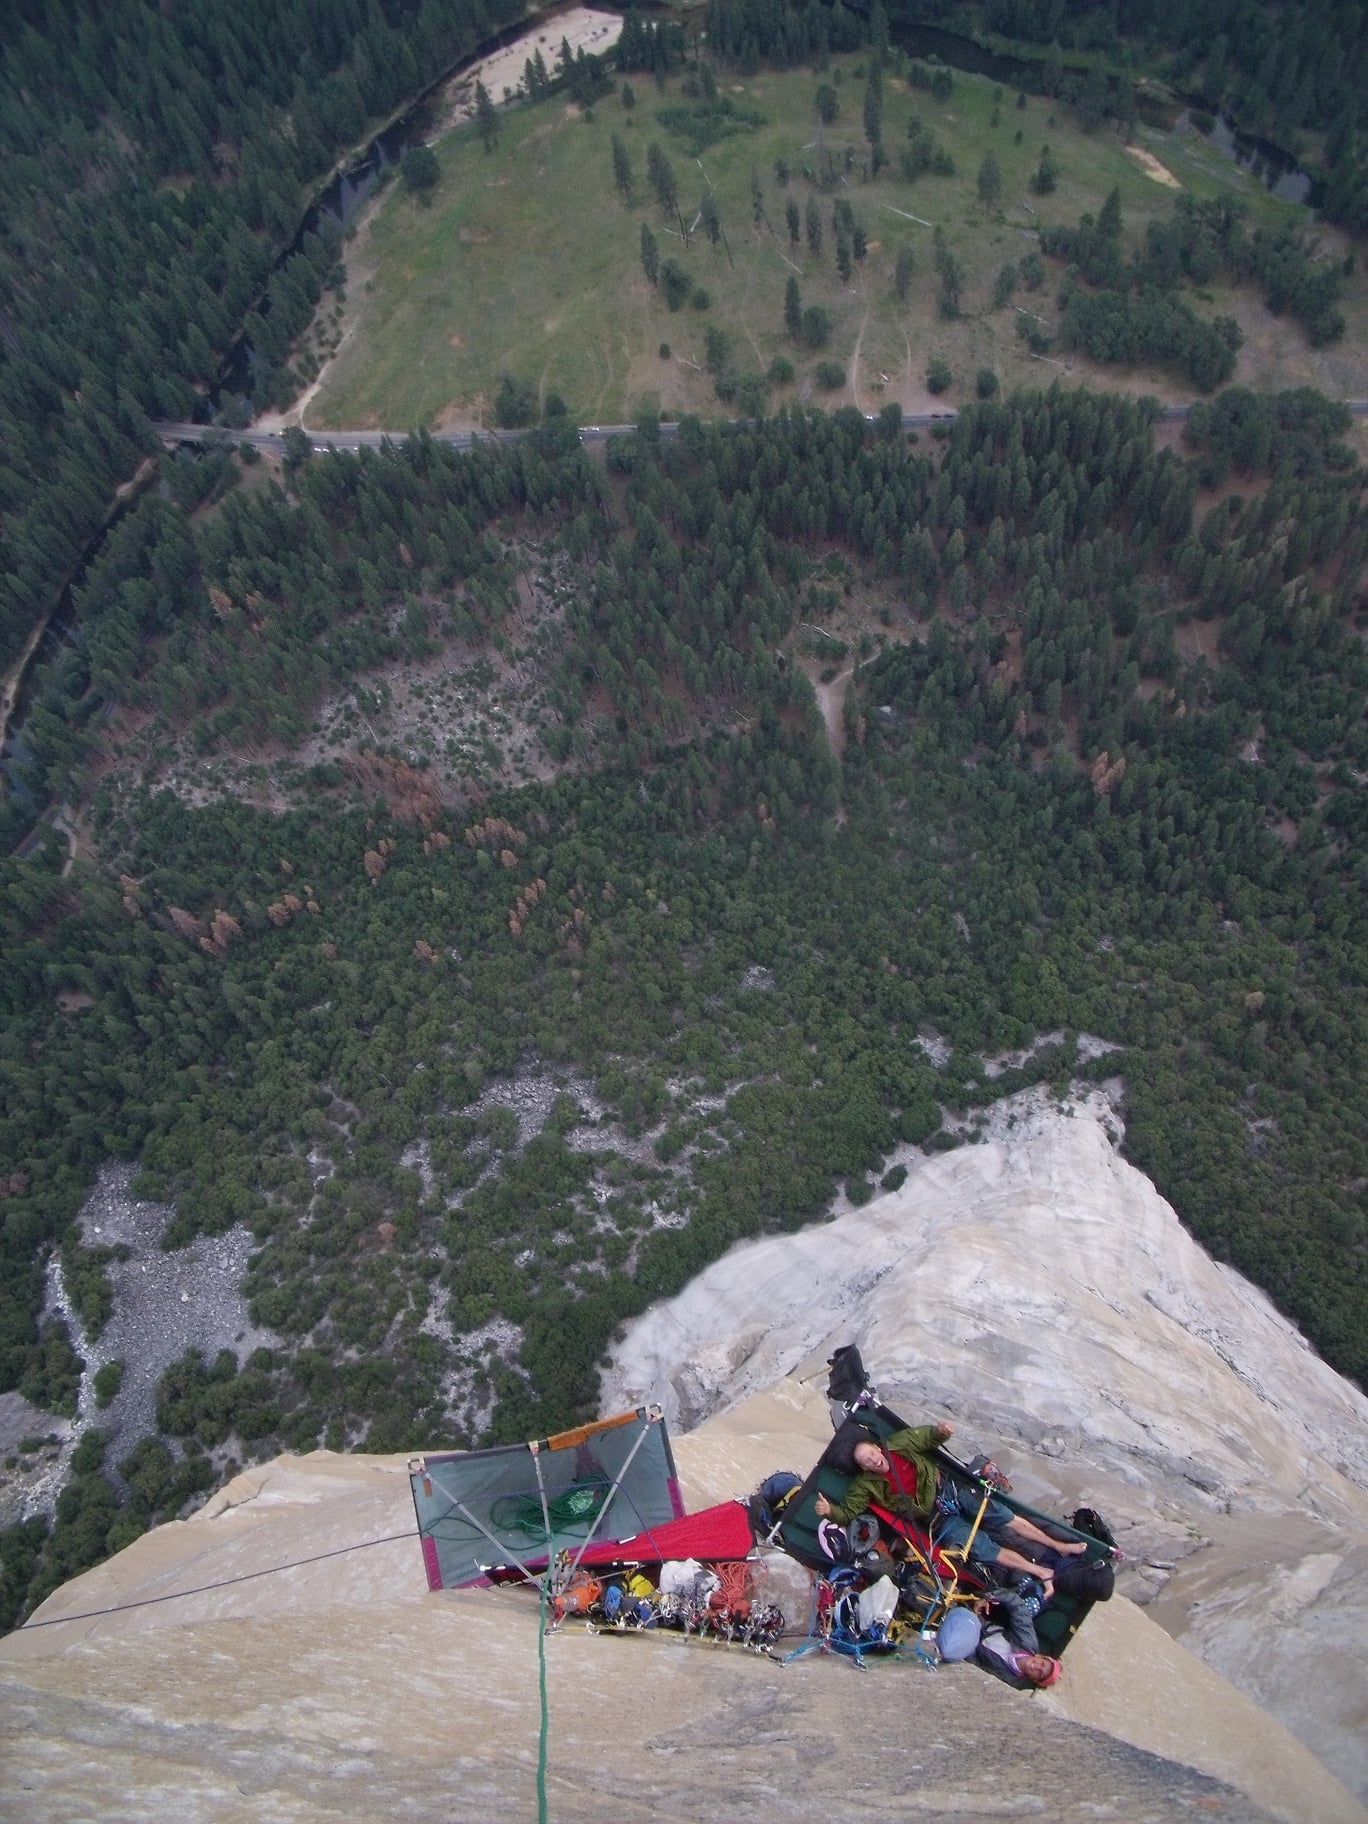 Zabrok and partners enjoying an El Cap route in style. [Photo] Peter Zabrok